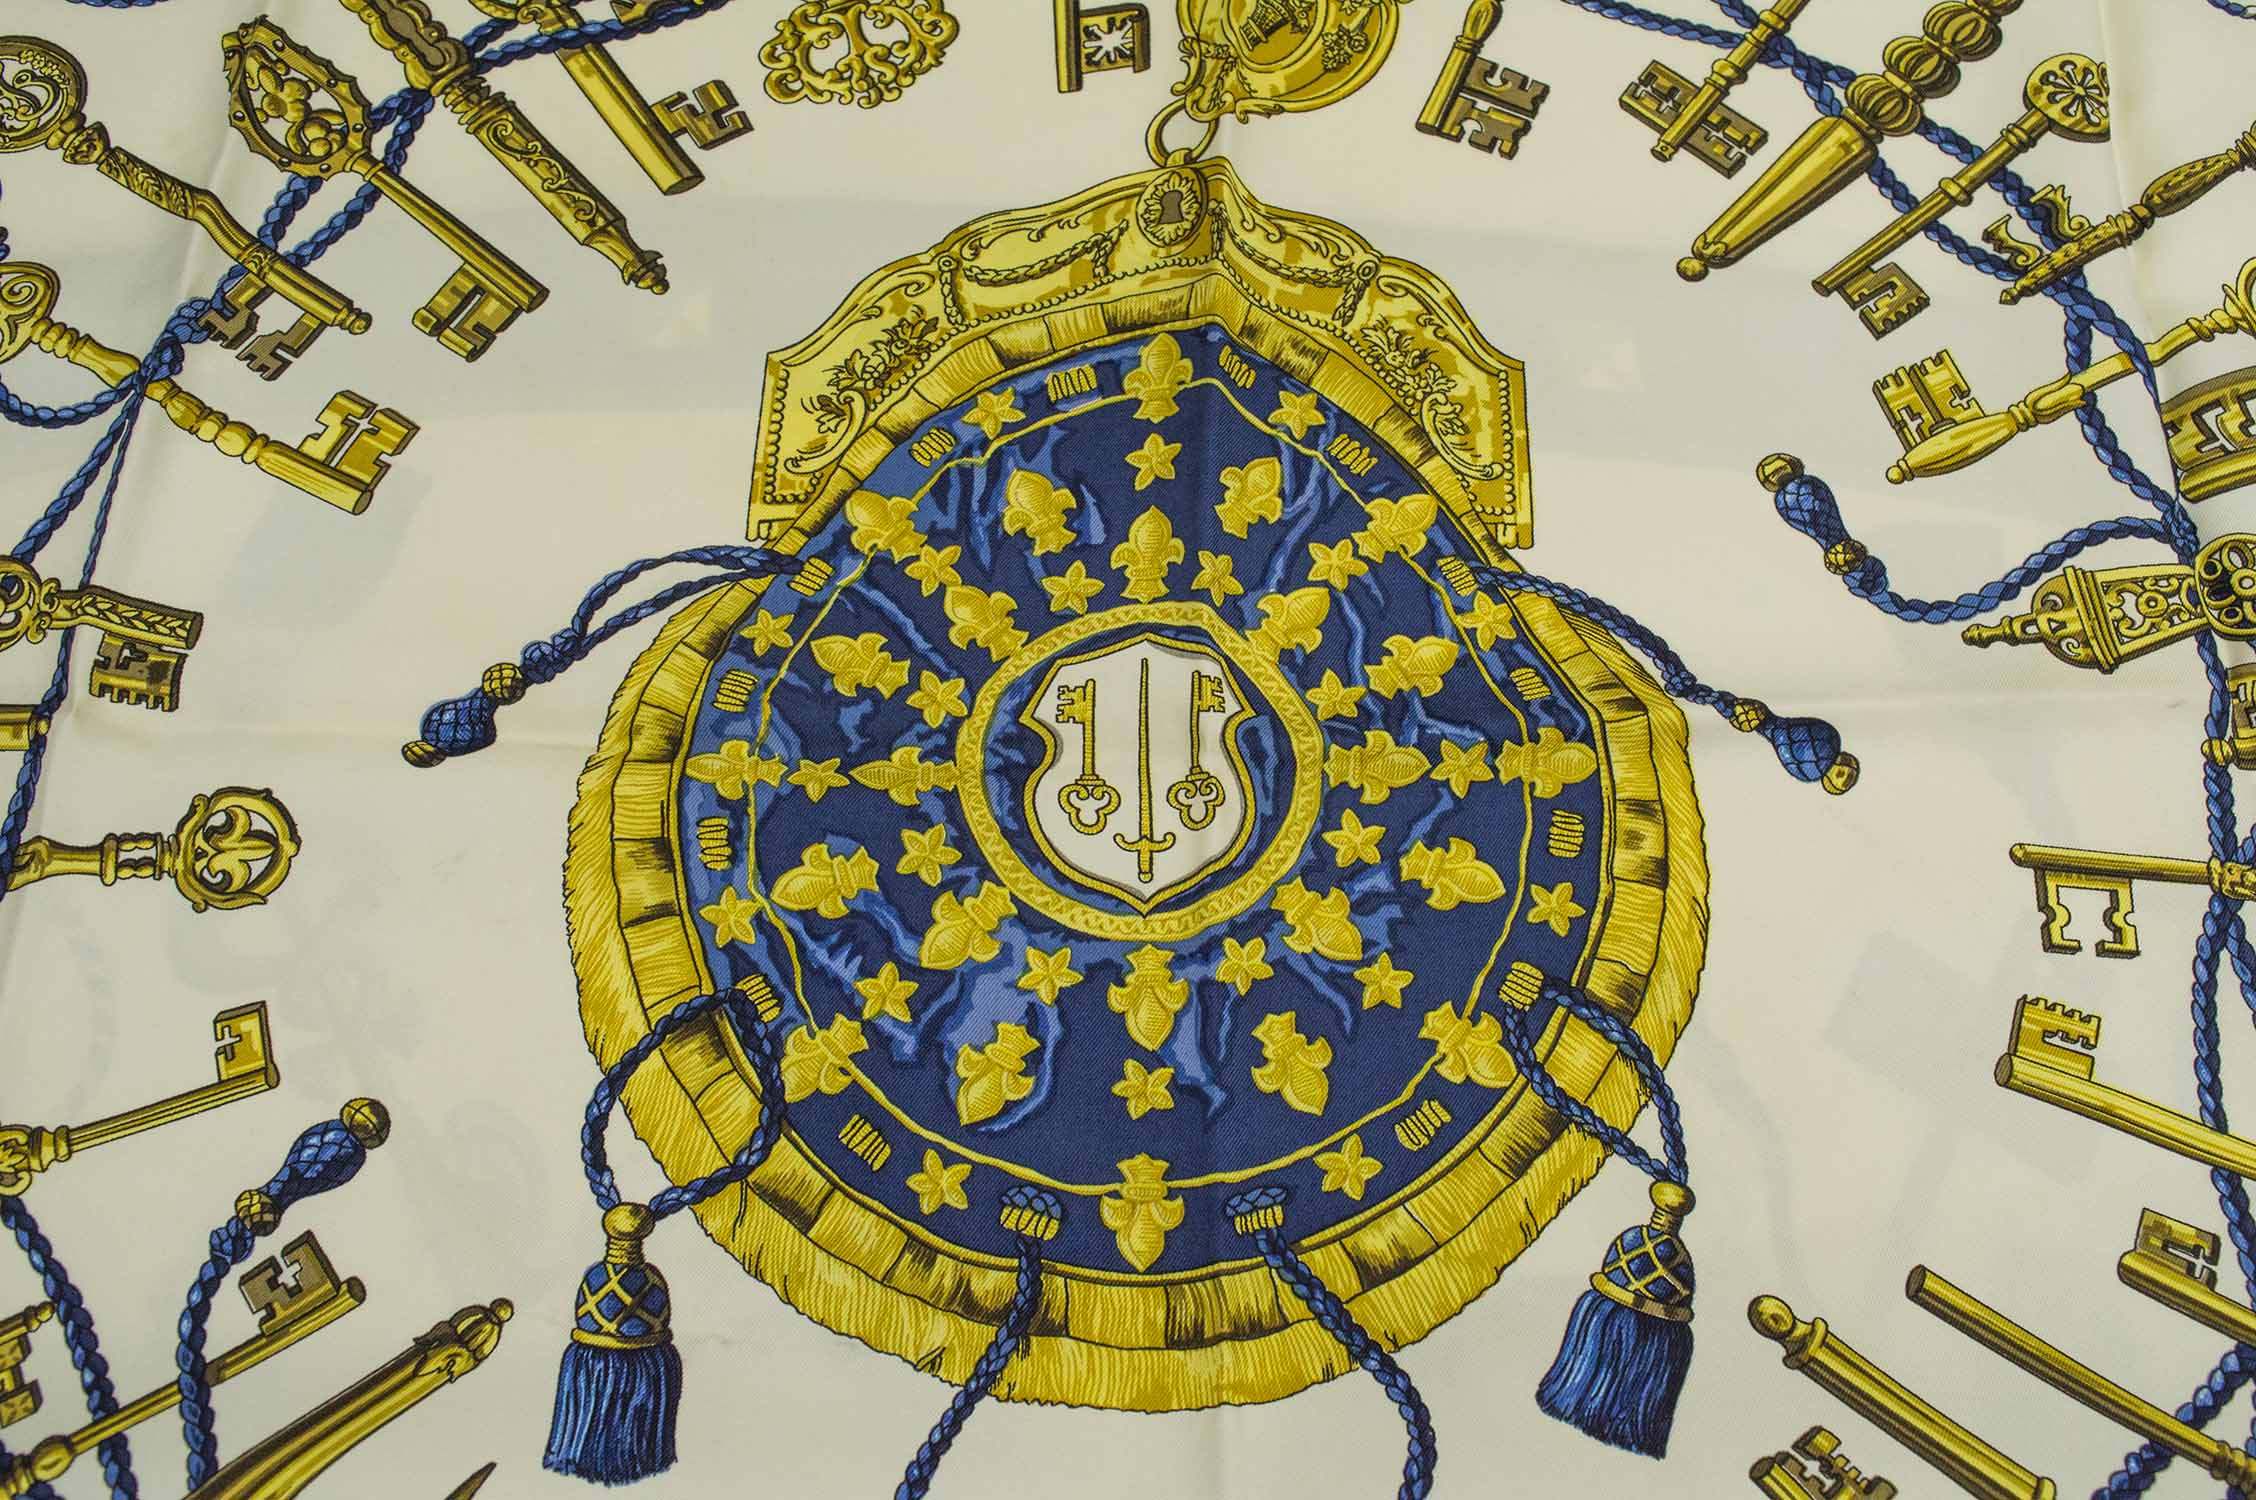 HERMÈS SCARF, 'Les clefs' of 'The keys', by Caty Latham, blue and gold, - Image 3 of 4